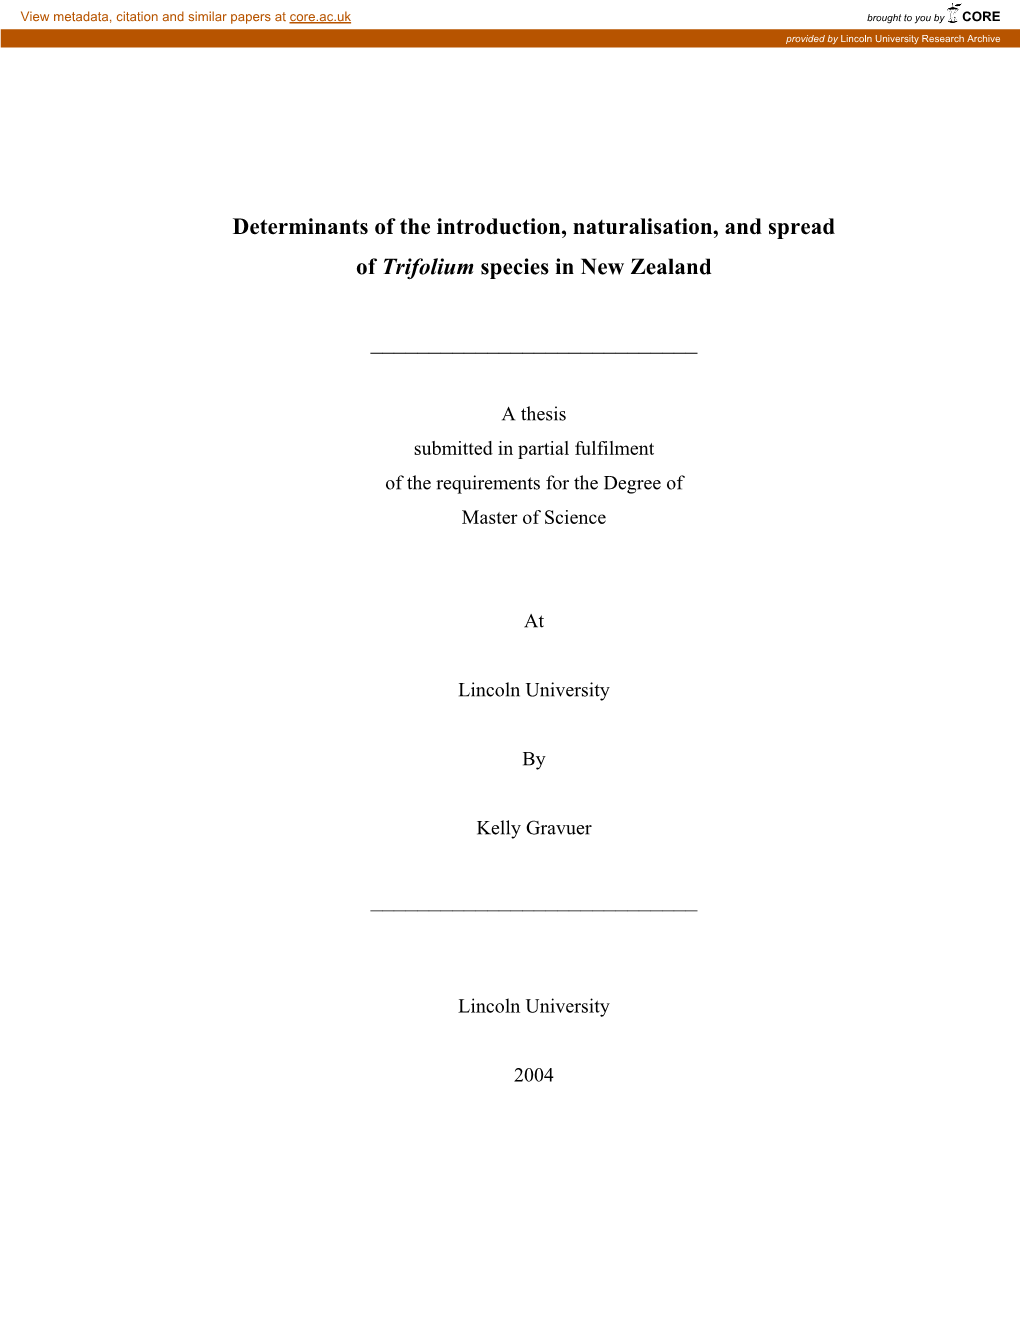 Determinants of the Introduction, Naturalisation and Spread